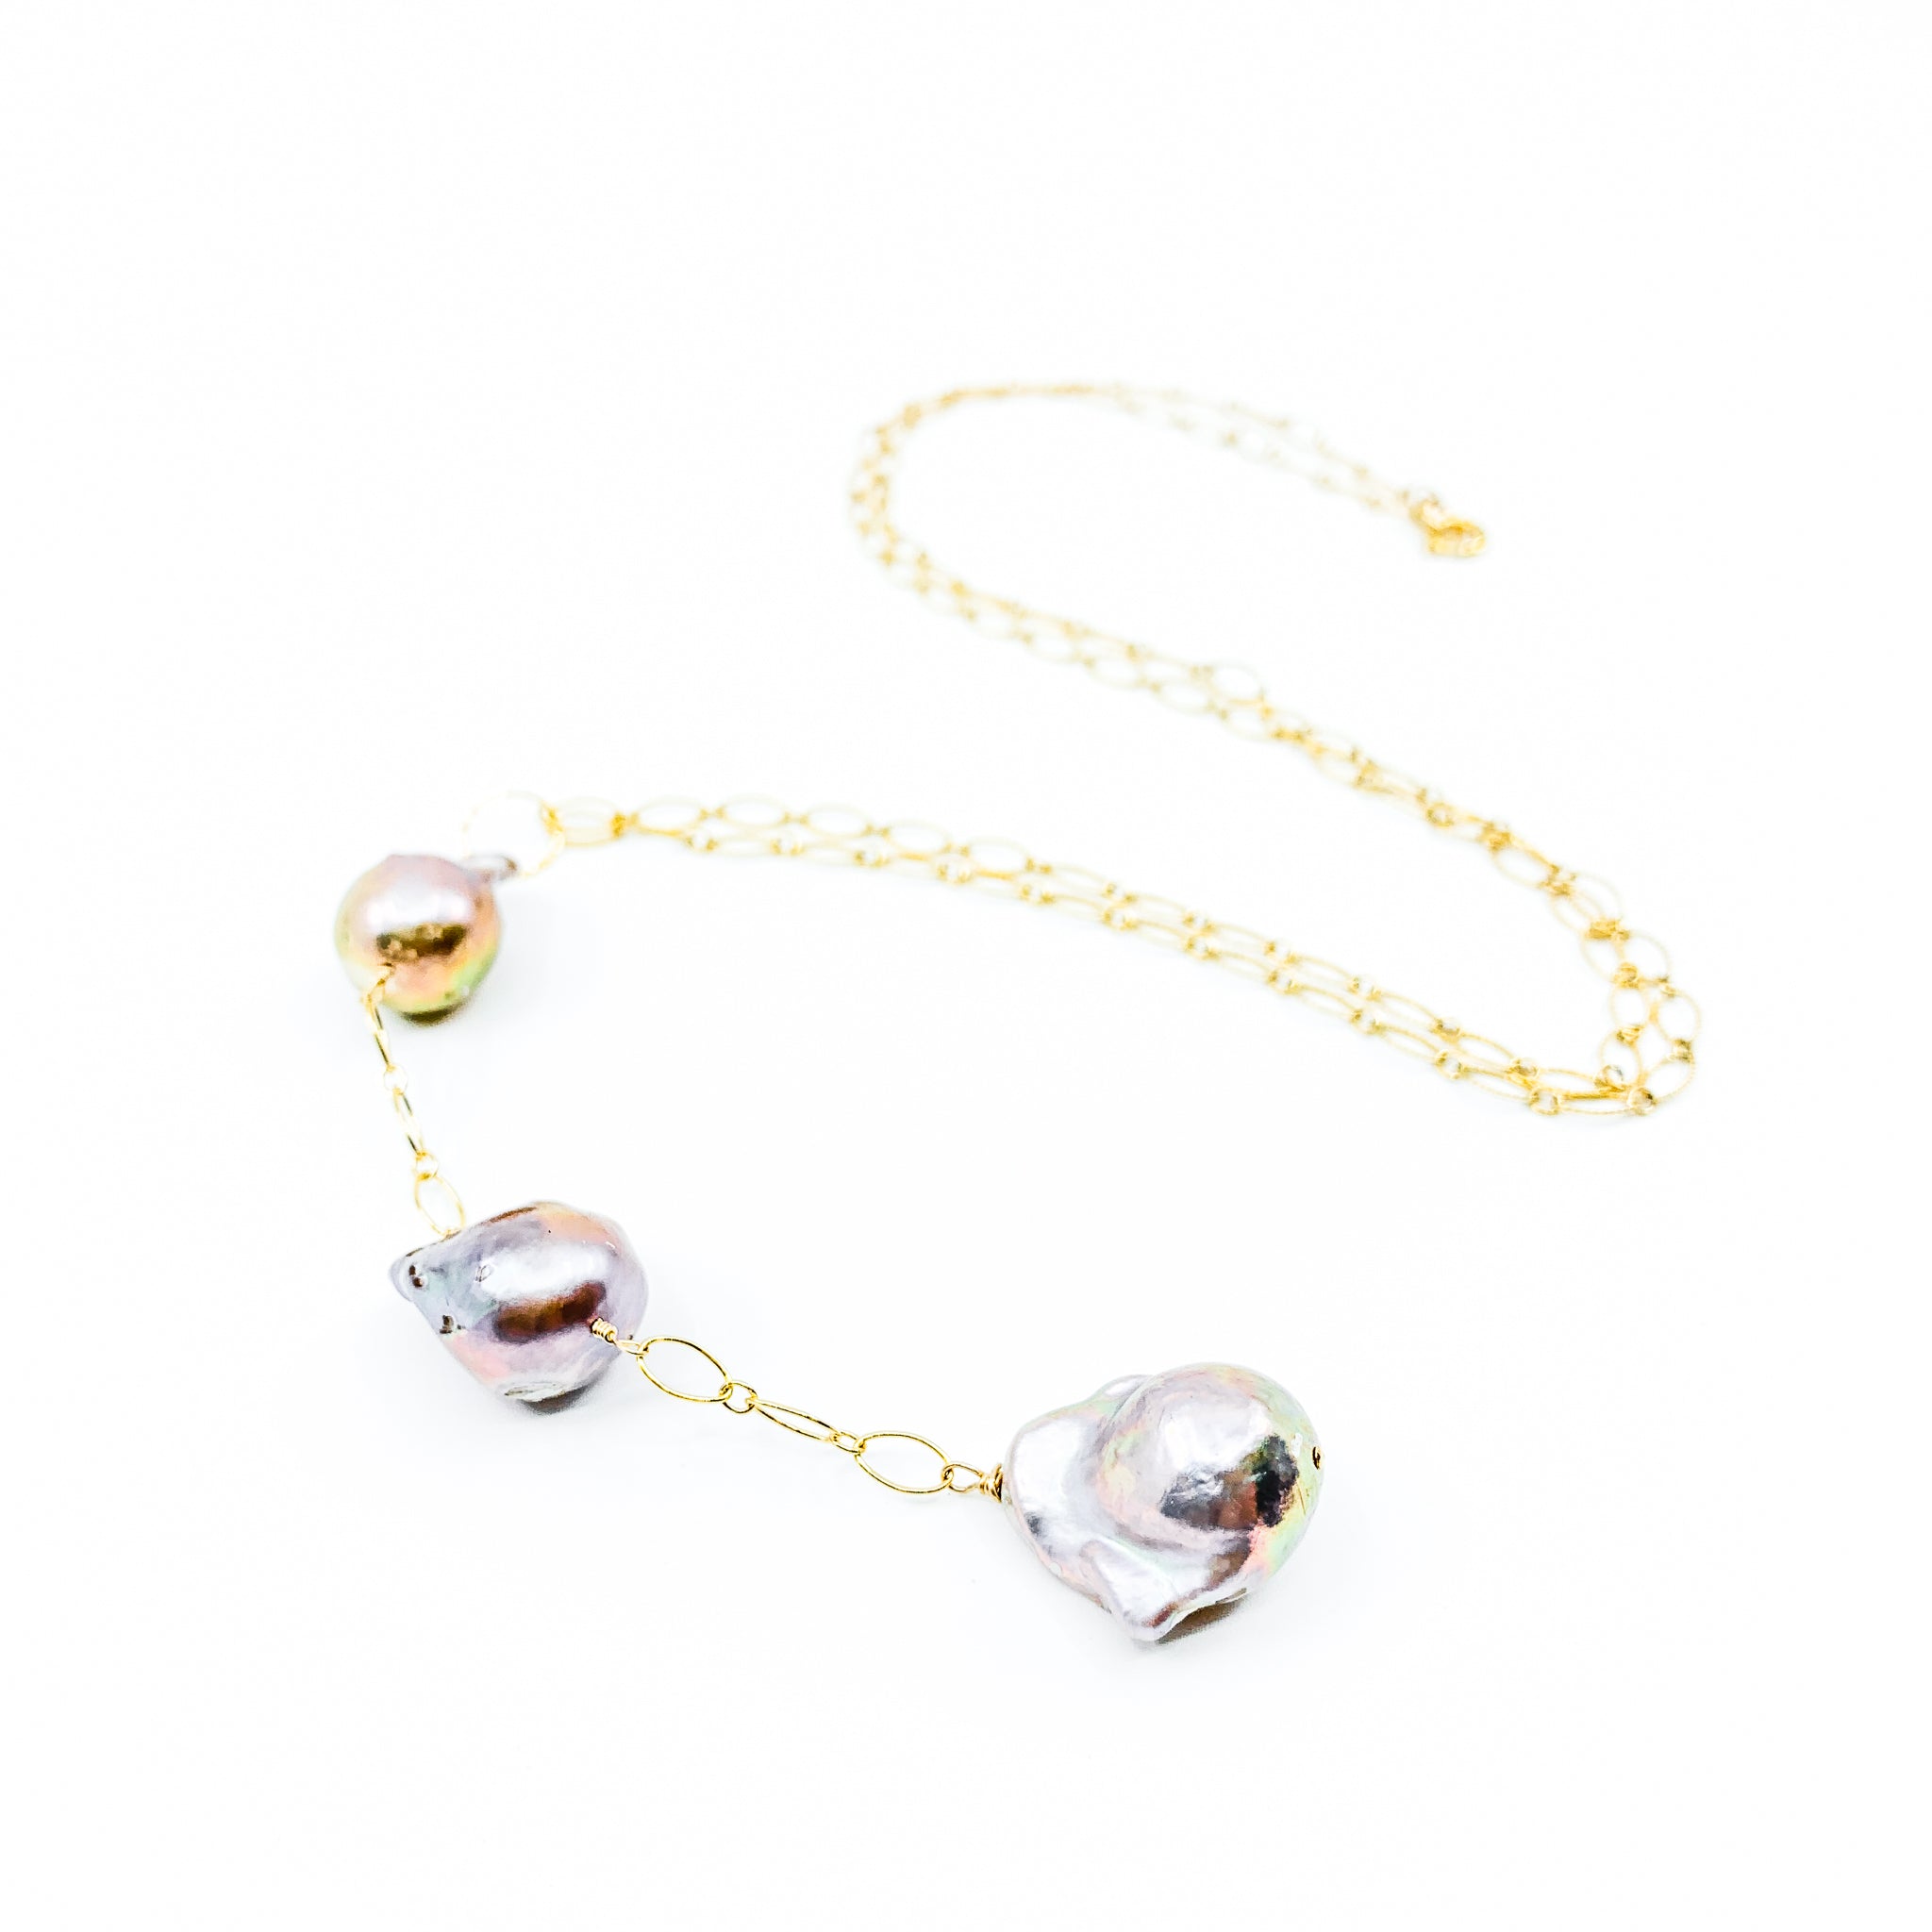 3 natural colored pink edison pearls on long gold chain by eve black jewelry made in Hawaii  Edit alt text